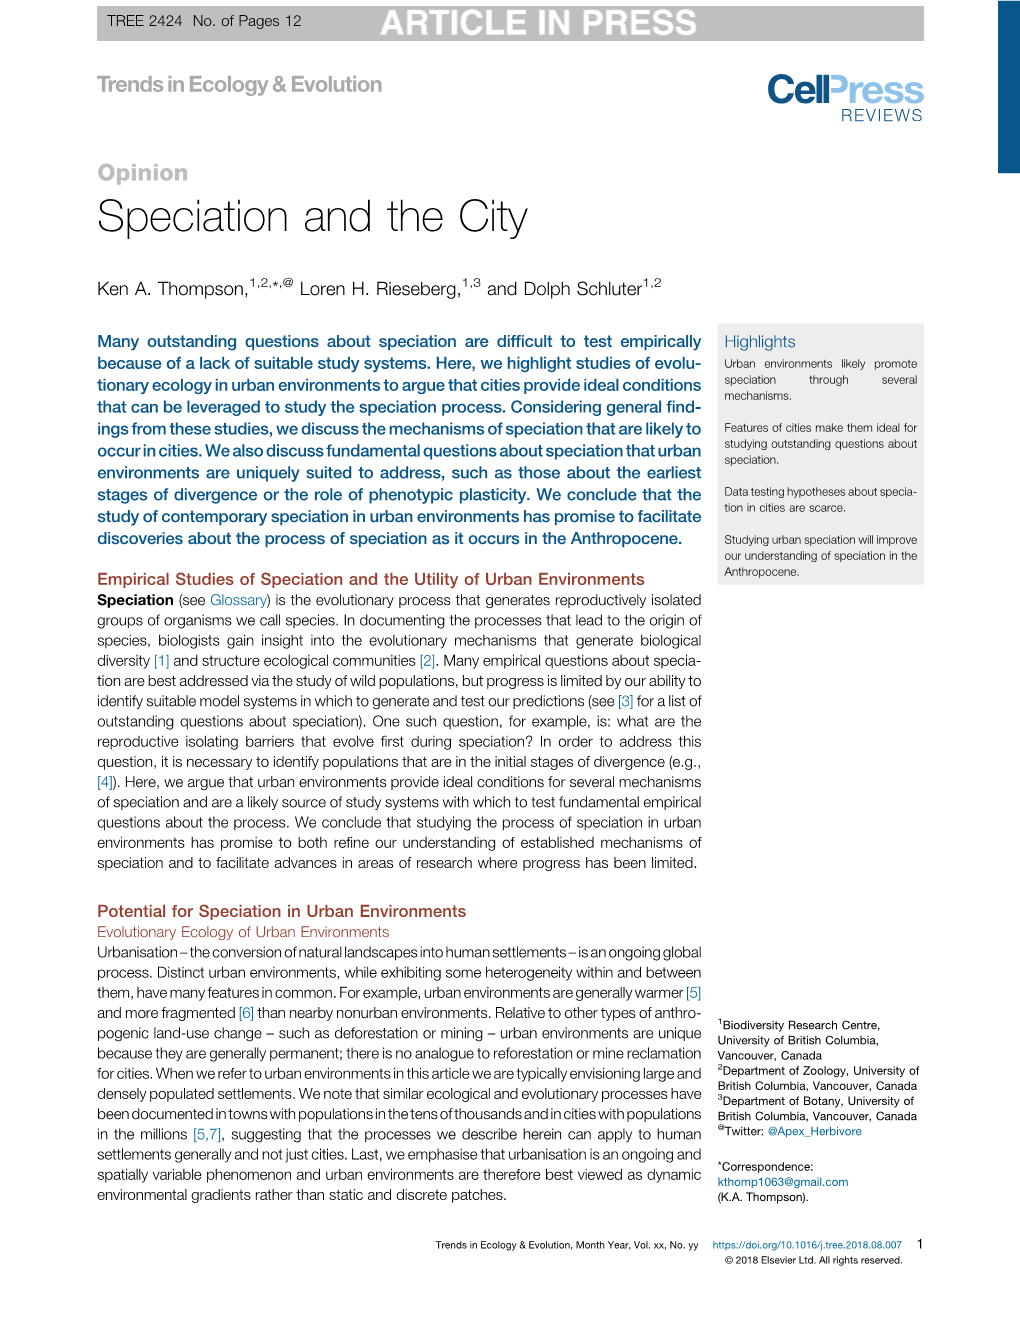 Speciation and the City